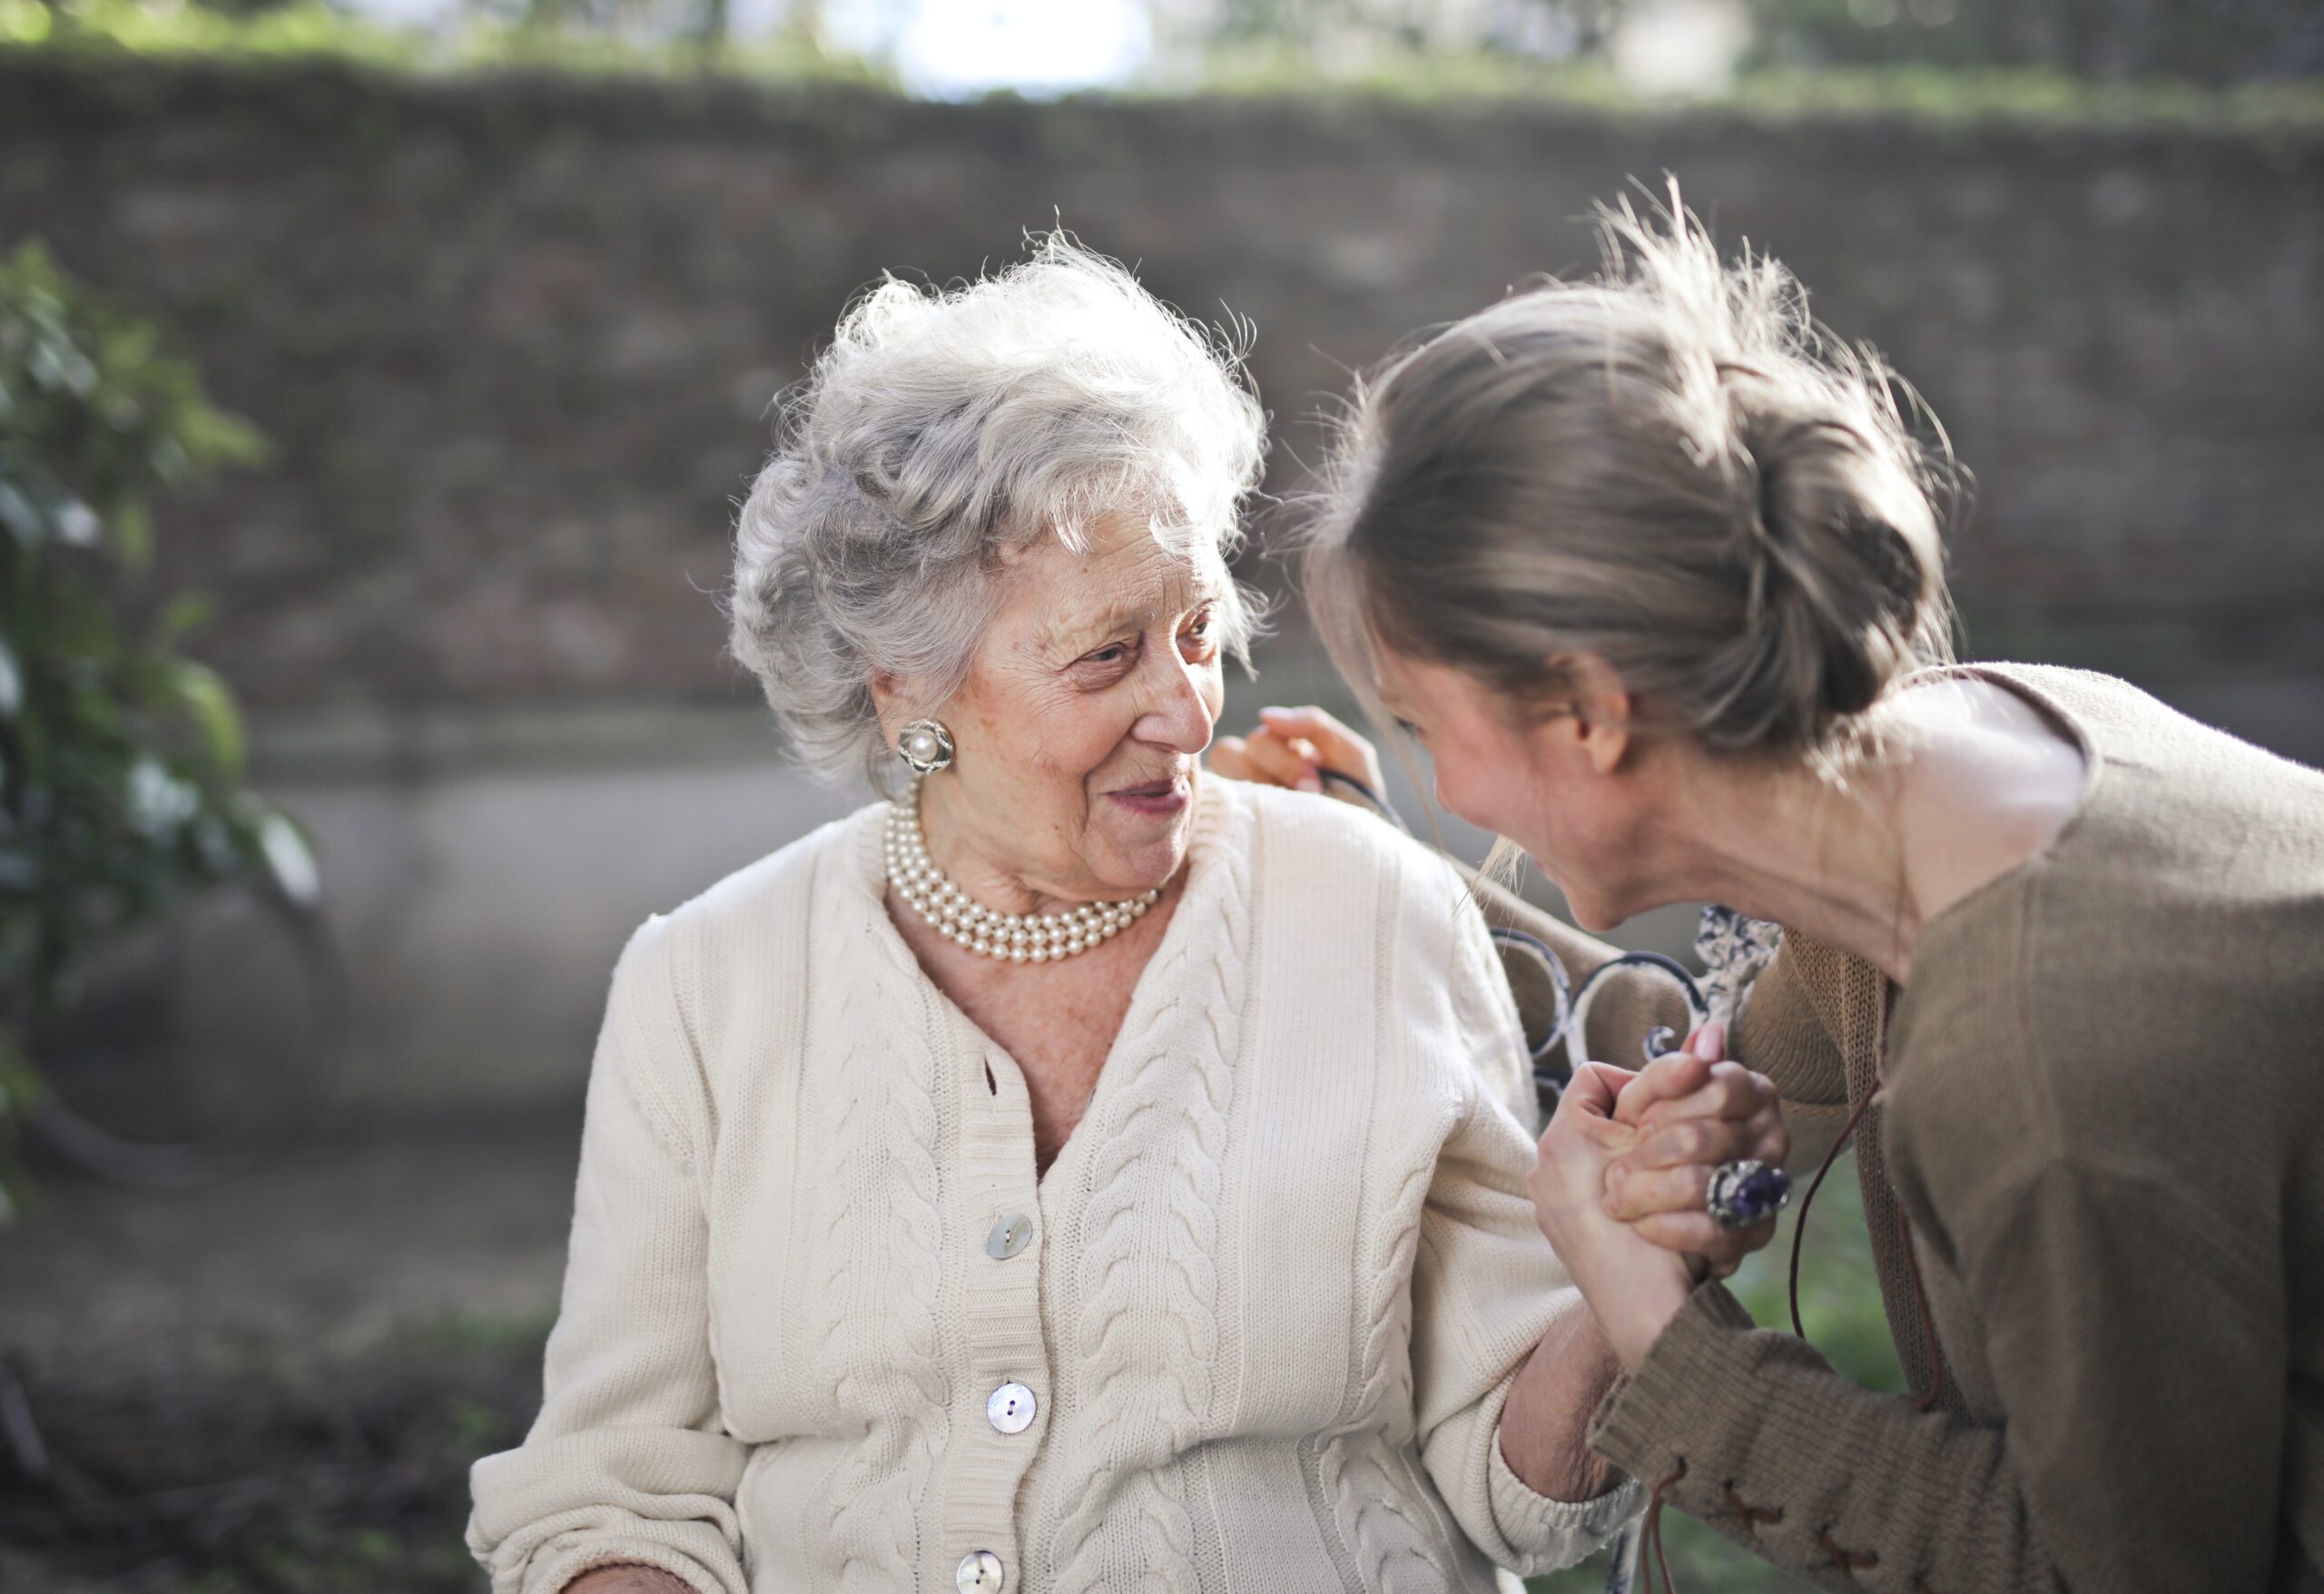 Nine Steps to Take When Your Elderly Parents Require Help